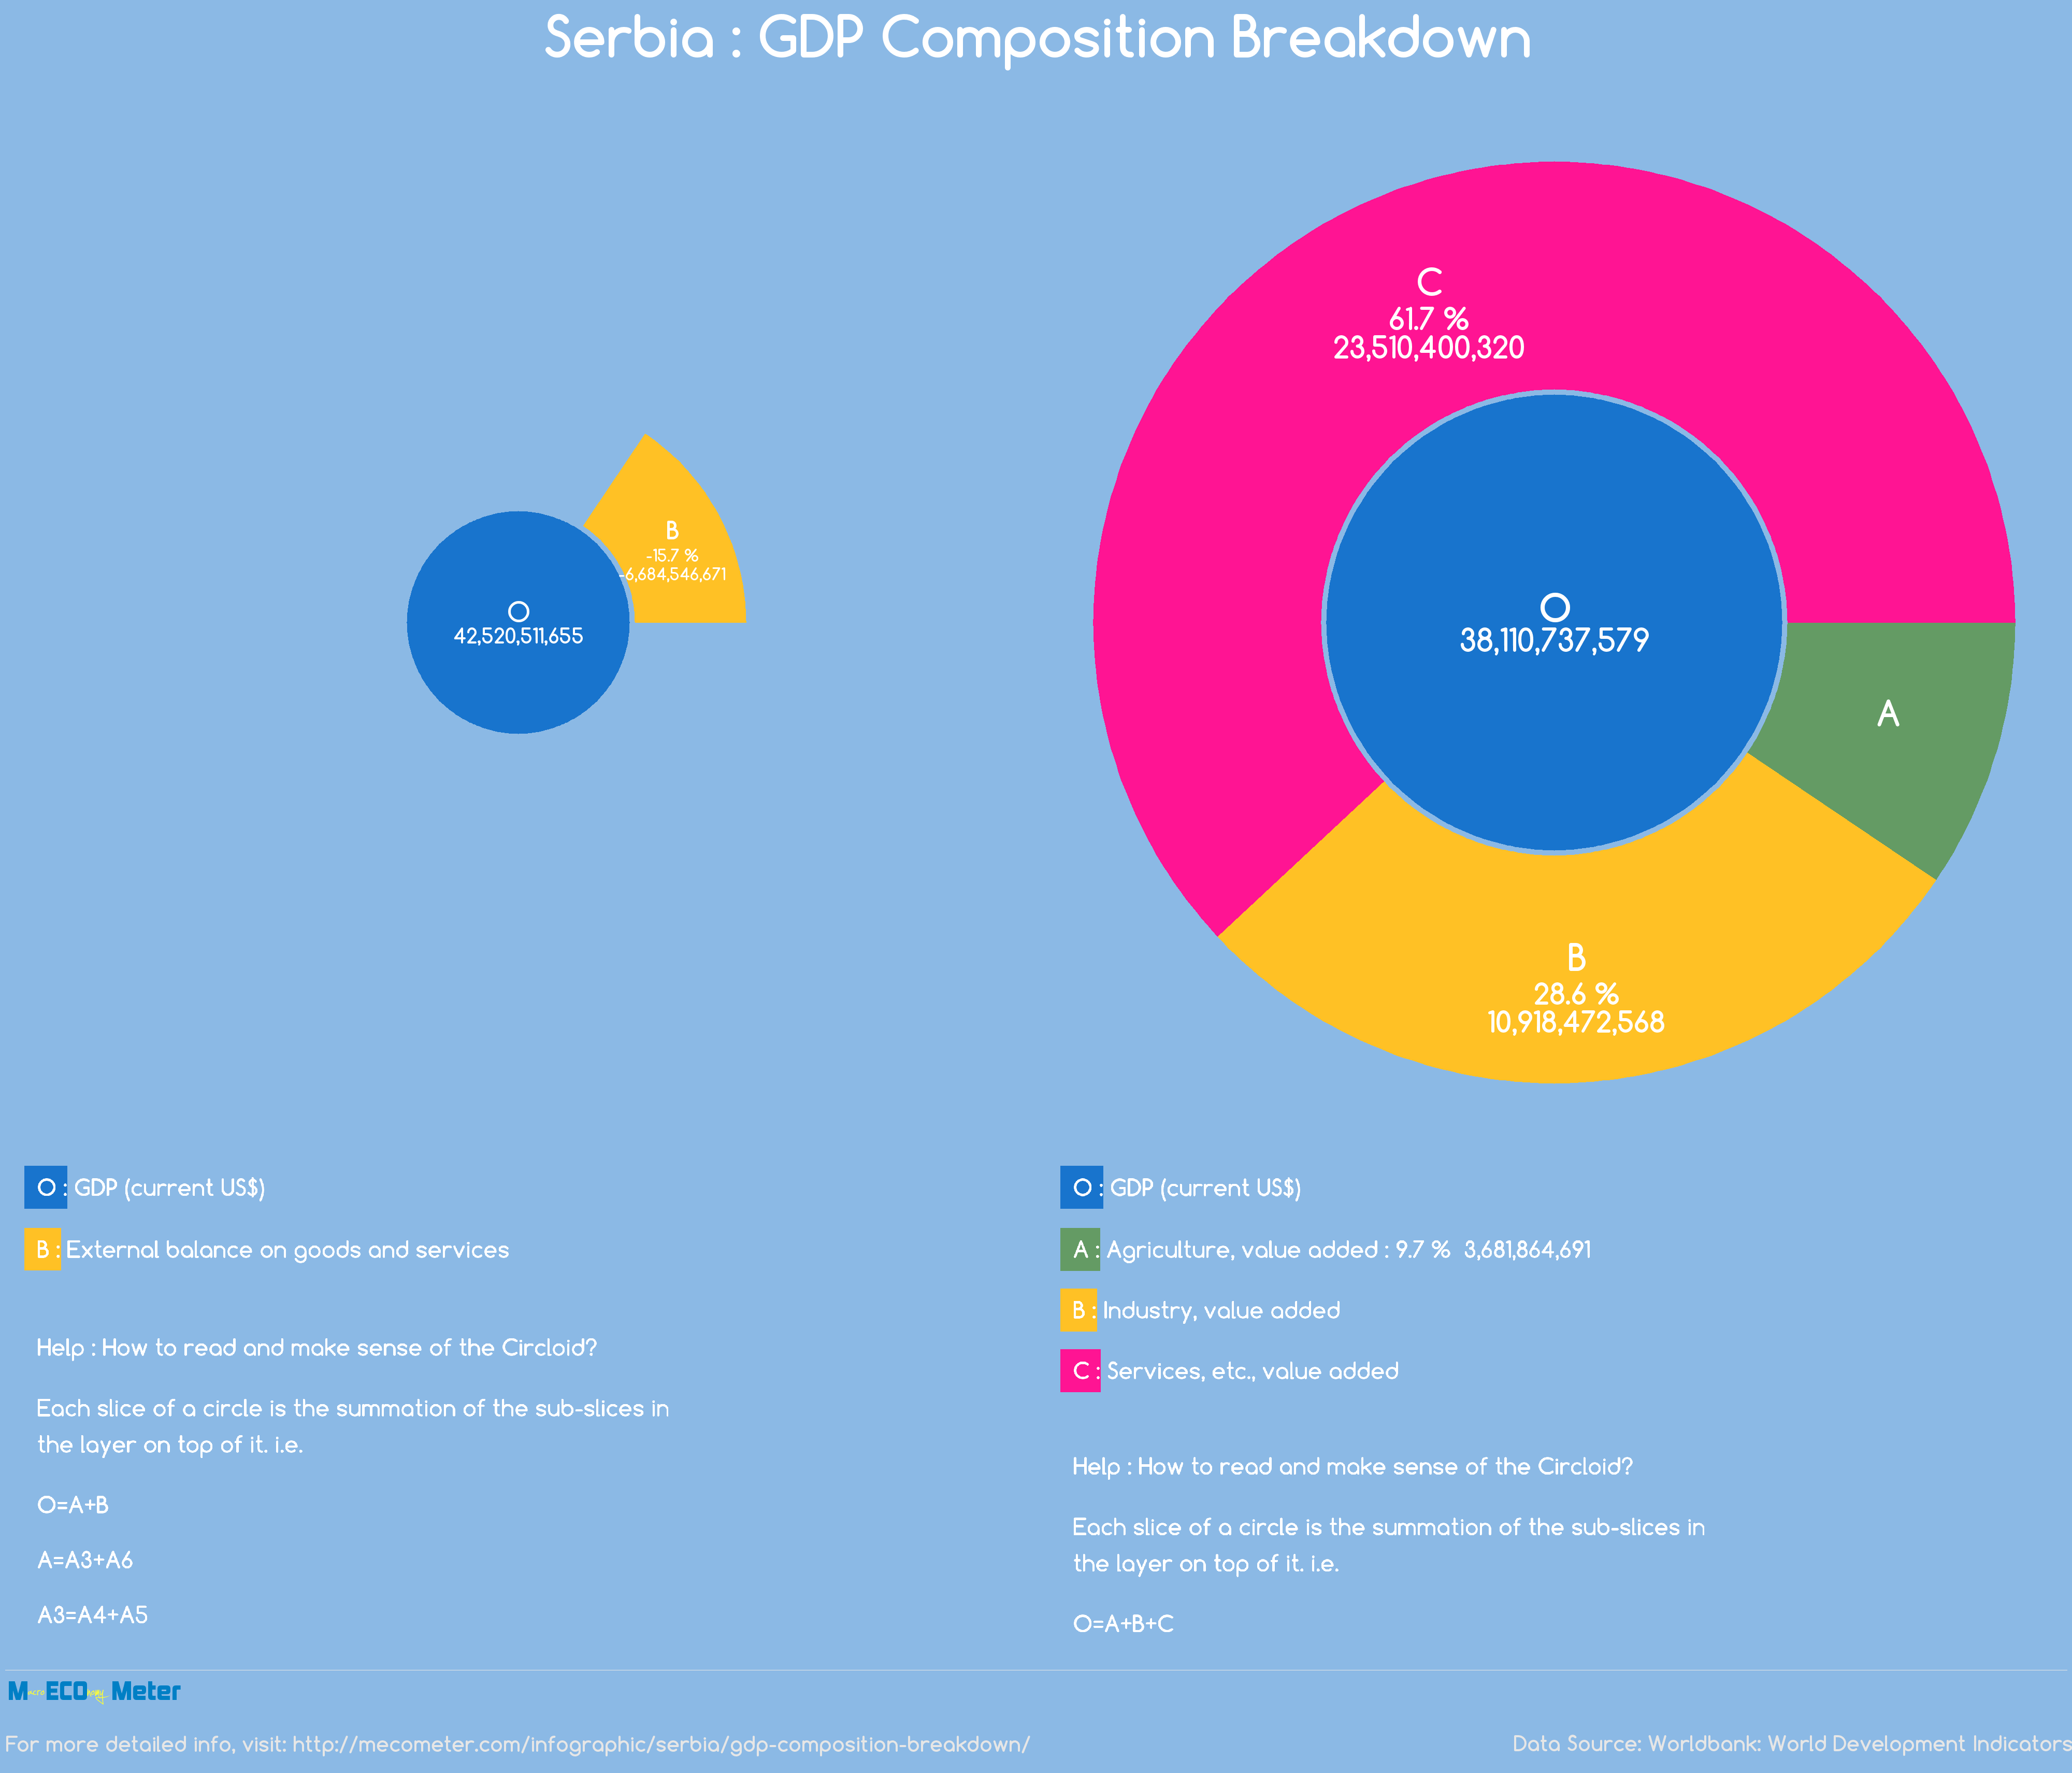 Serbia : GDP Composition Breakdown